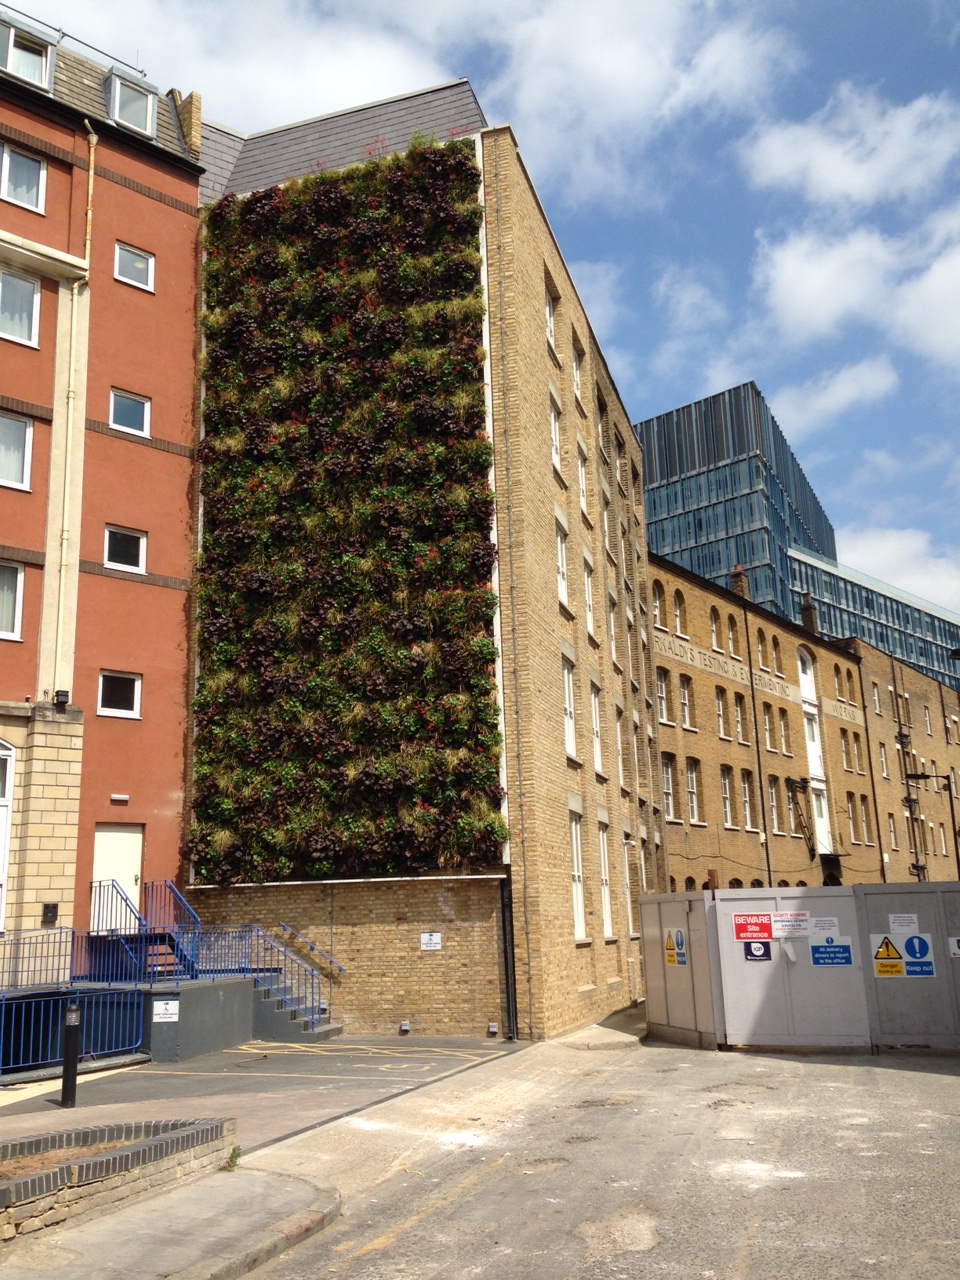 Example of a green wall on the side of an office building.